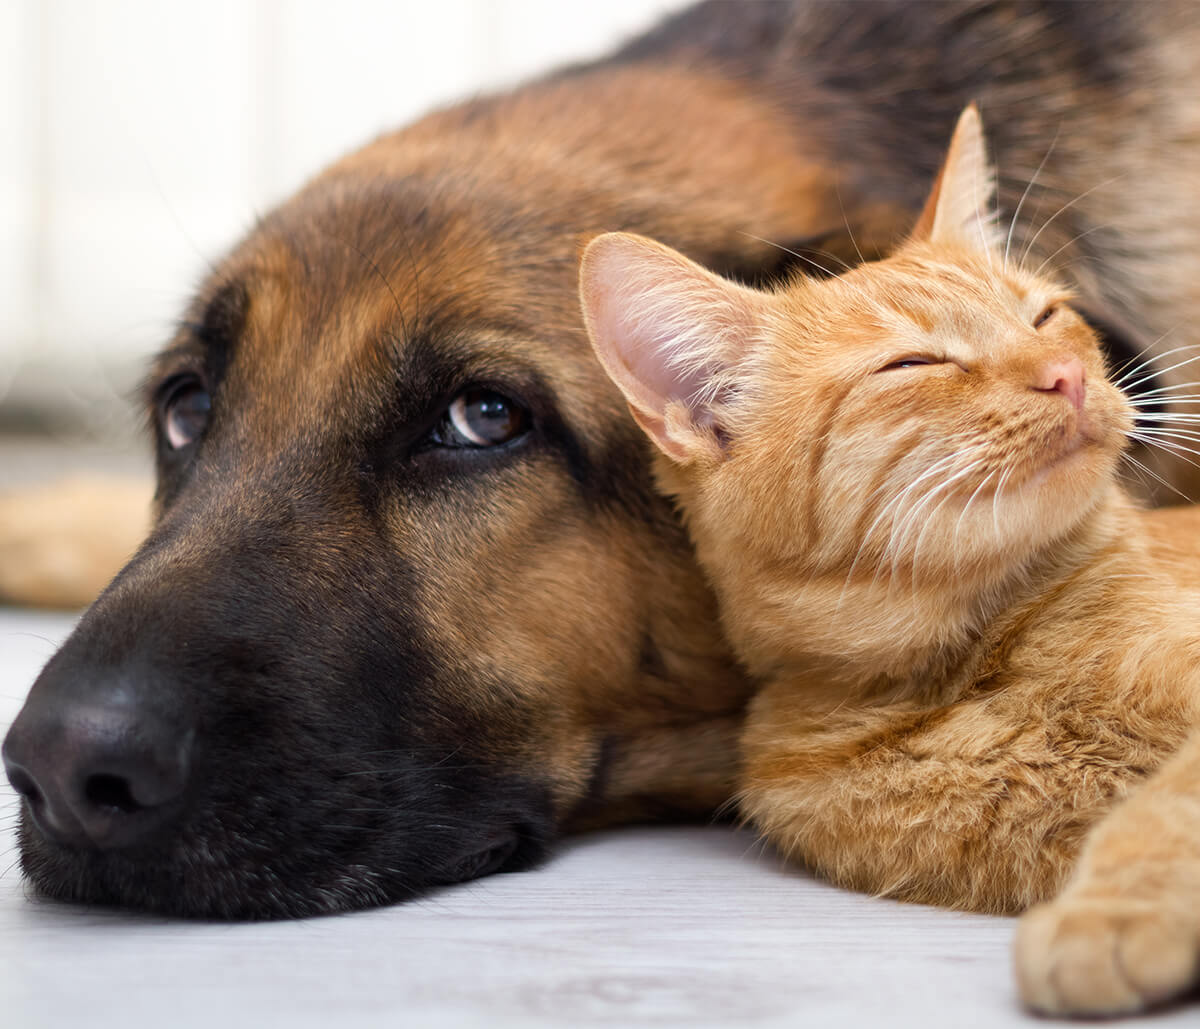 Benefits of using pet wellness plans for your pet’s routine veterinary care